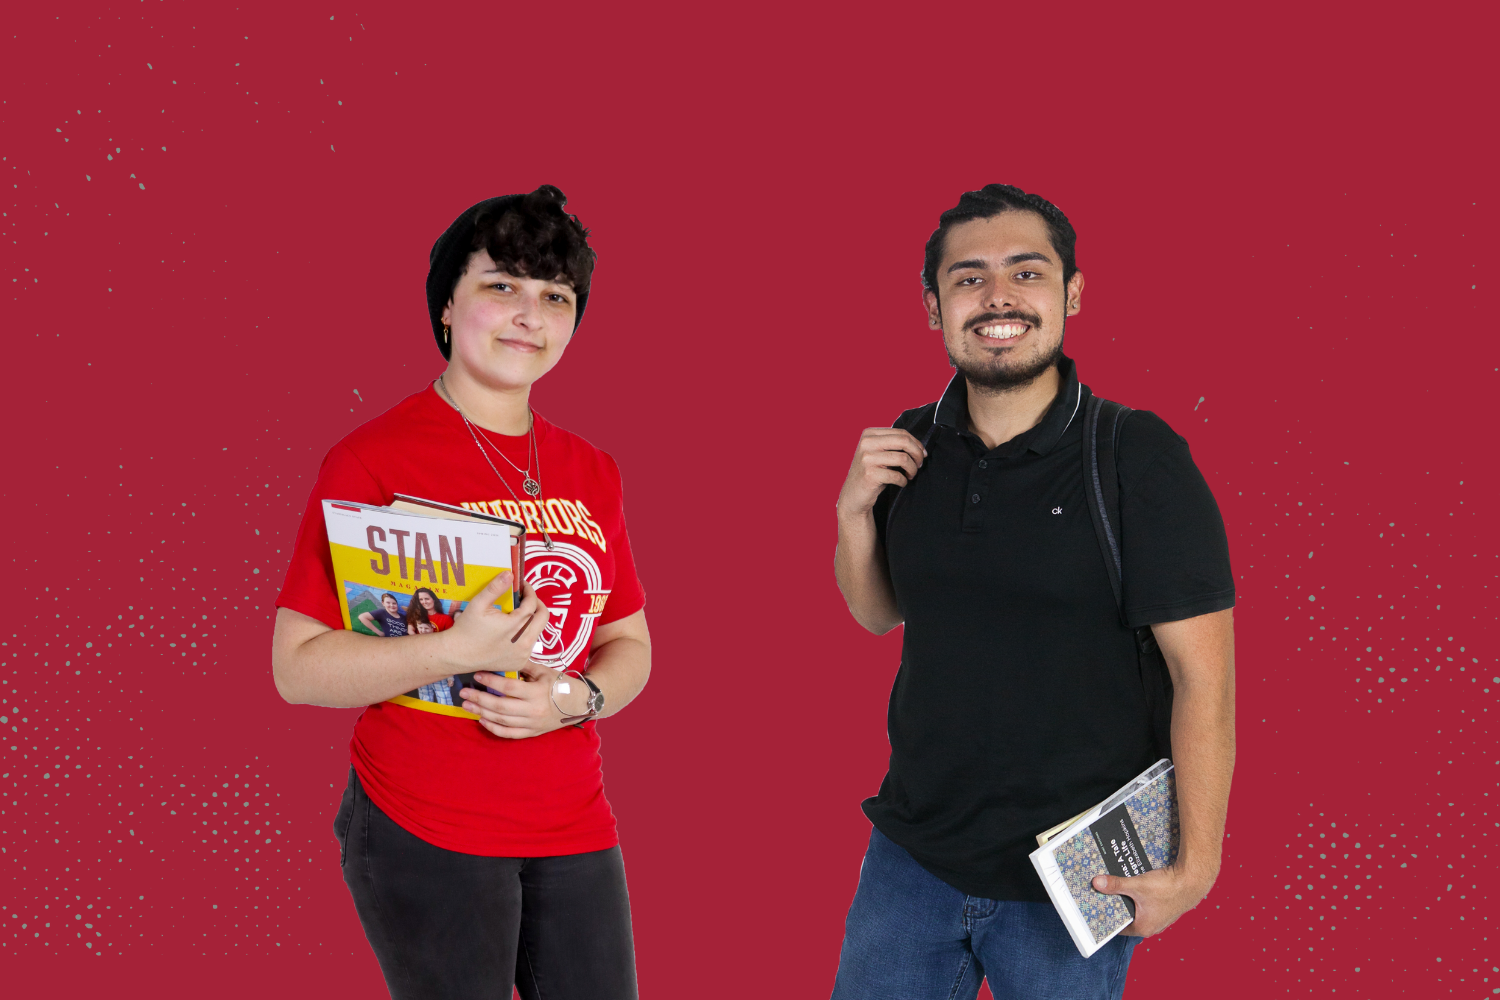 Two students in photo.